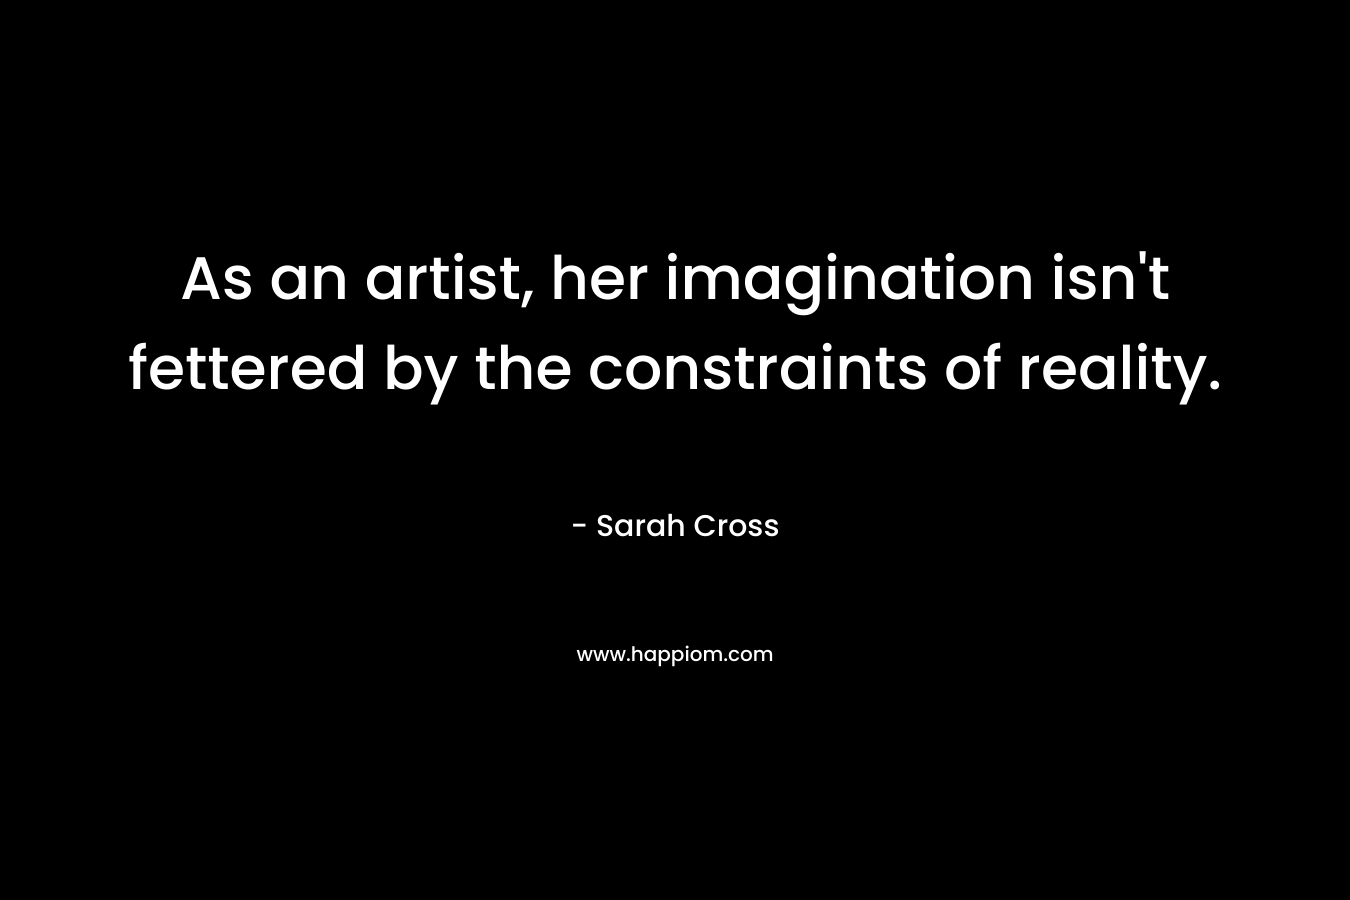 As an artist, her imagination isn’t fettered by the constraints of reality. – Sarah Cross